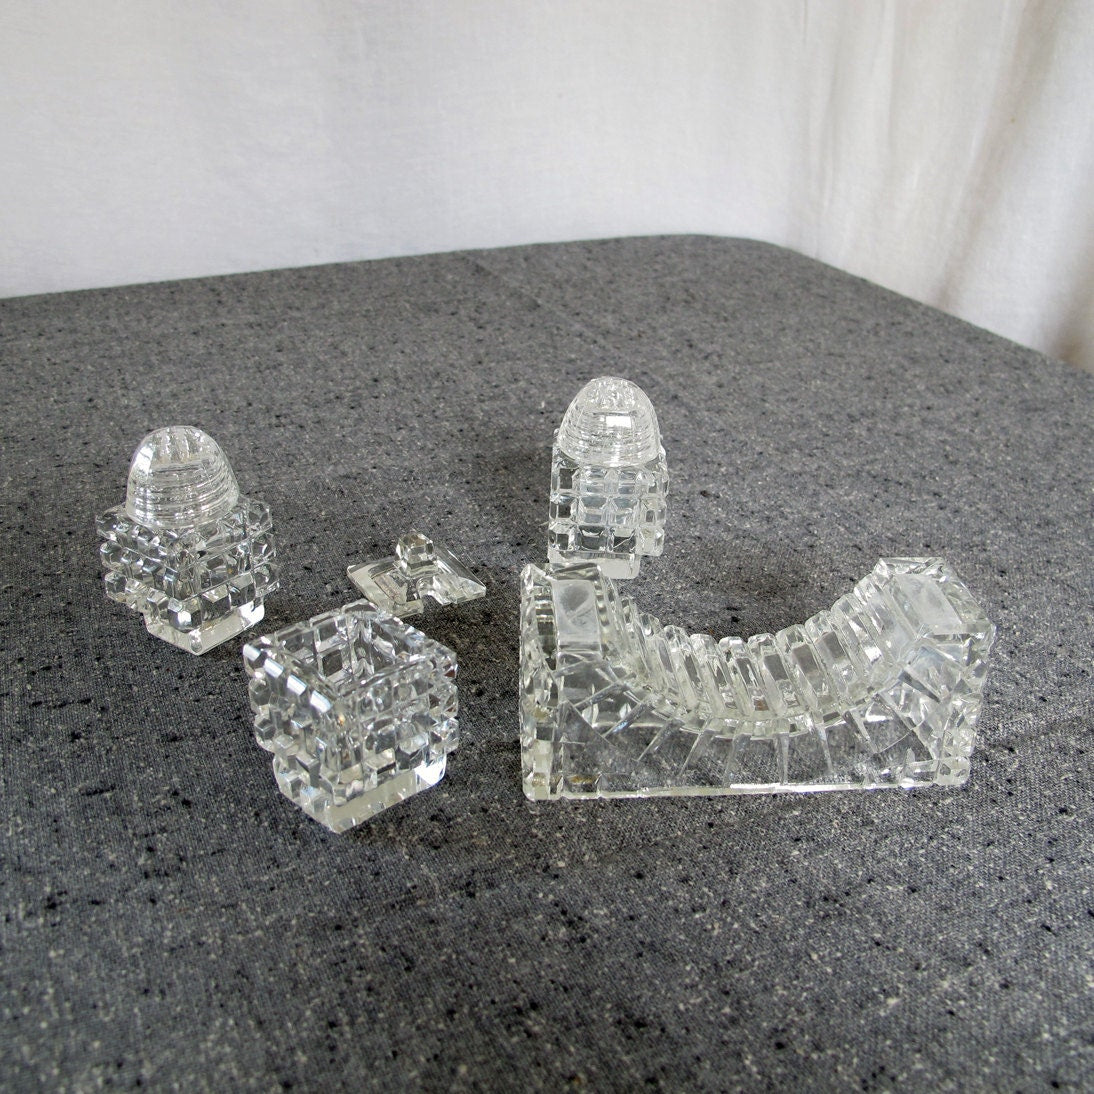 Crystal Salt and Pepper Shakers with Cruet Architectural Art Deco Cut in Bridge Form 1920s